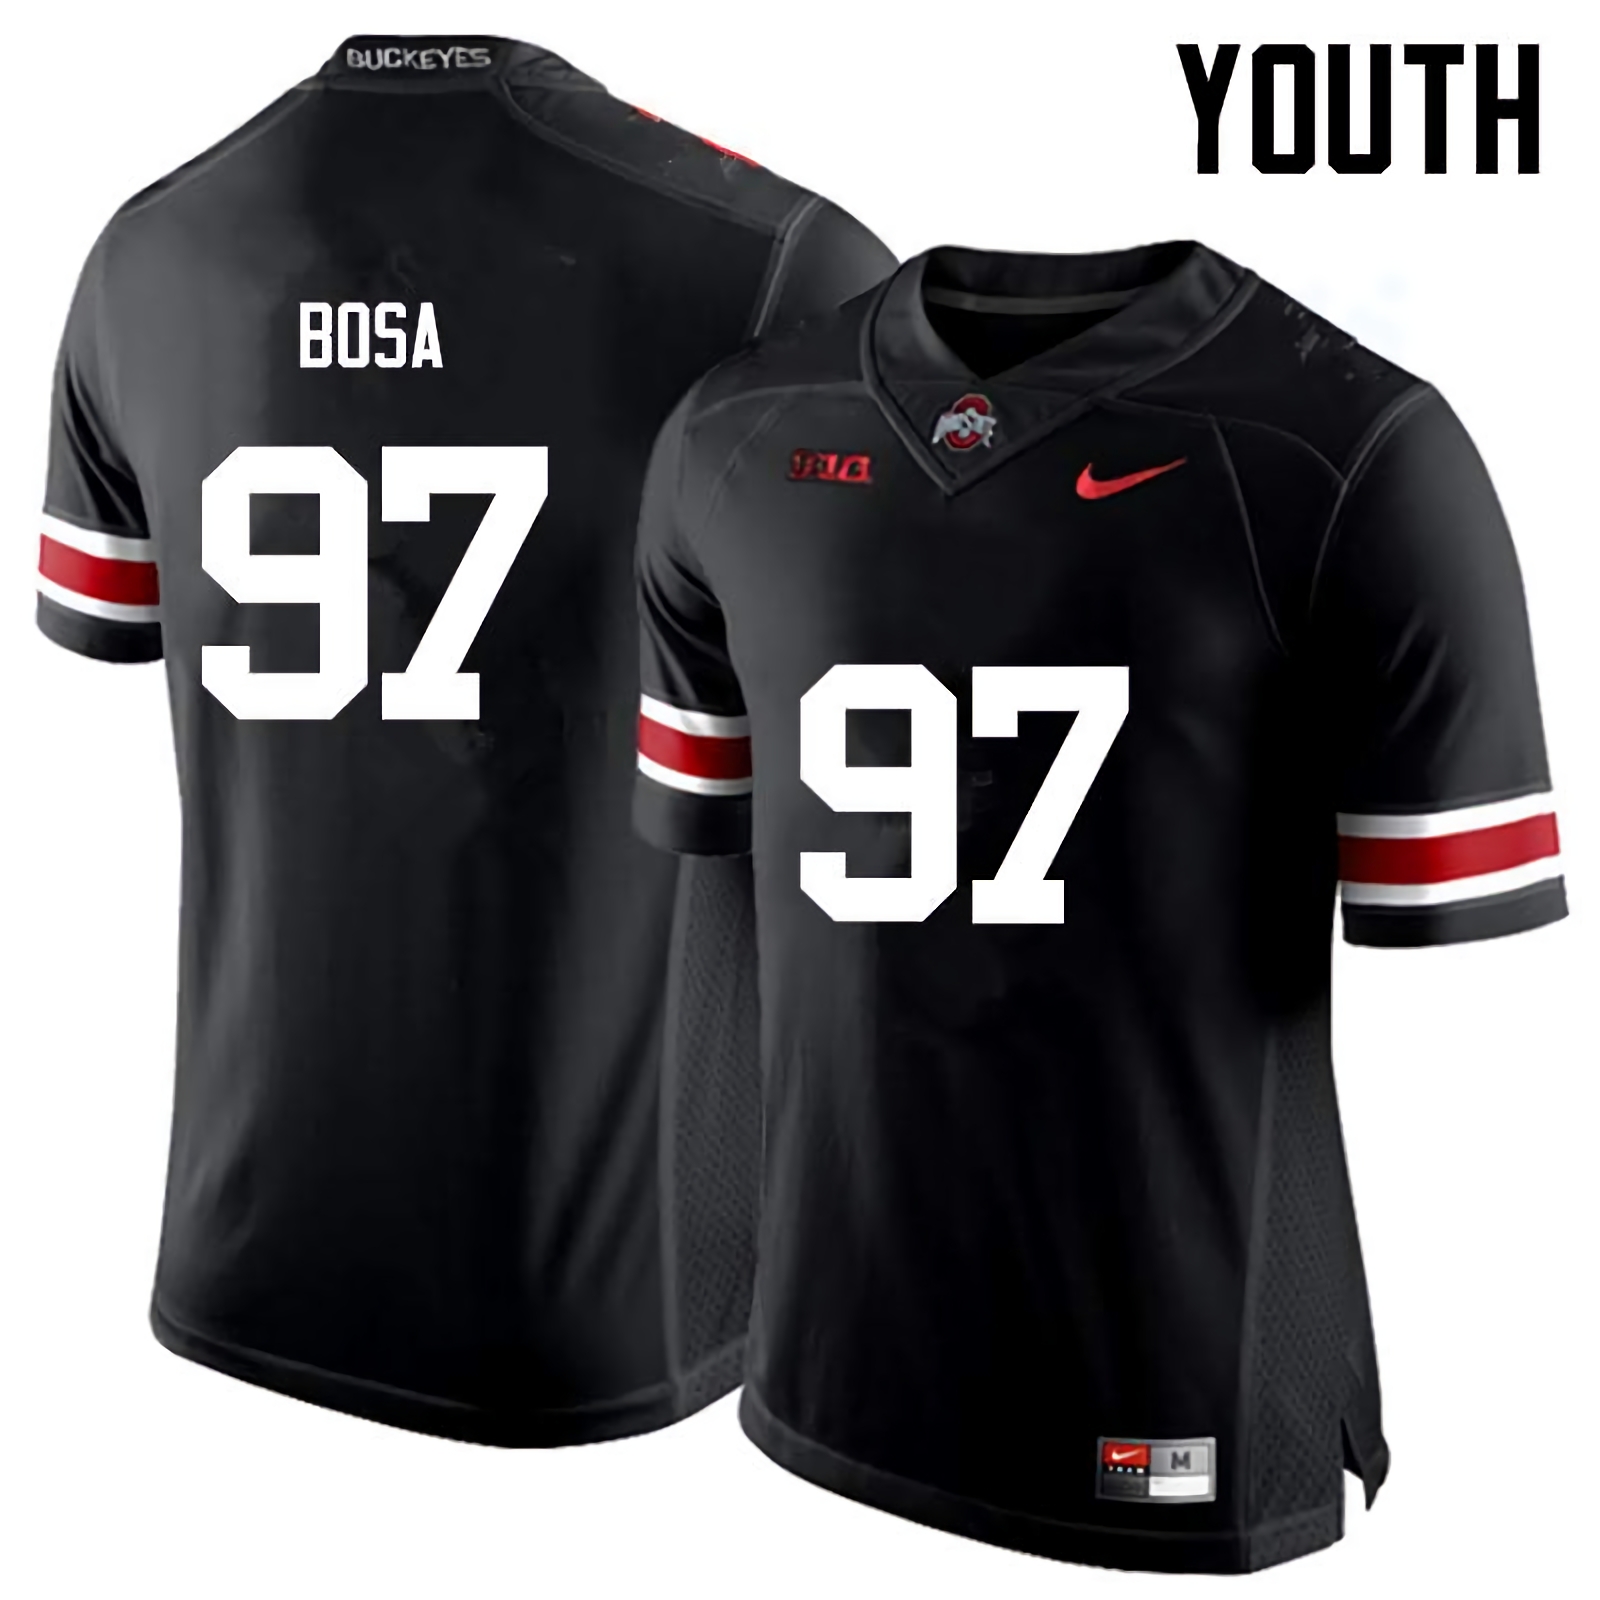 Nick Bosa Ohio State Buckeyes Youth NCAA #97 Nike Black College Stitched Football Jersey MKO8156VT